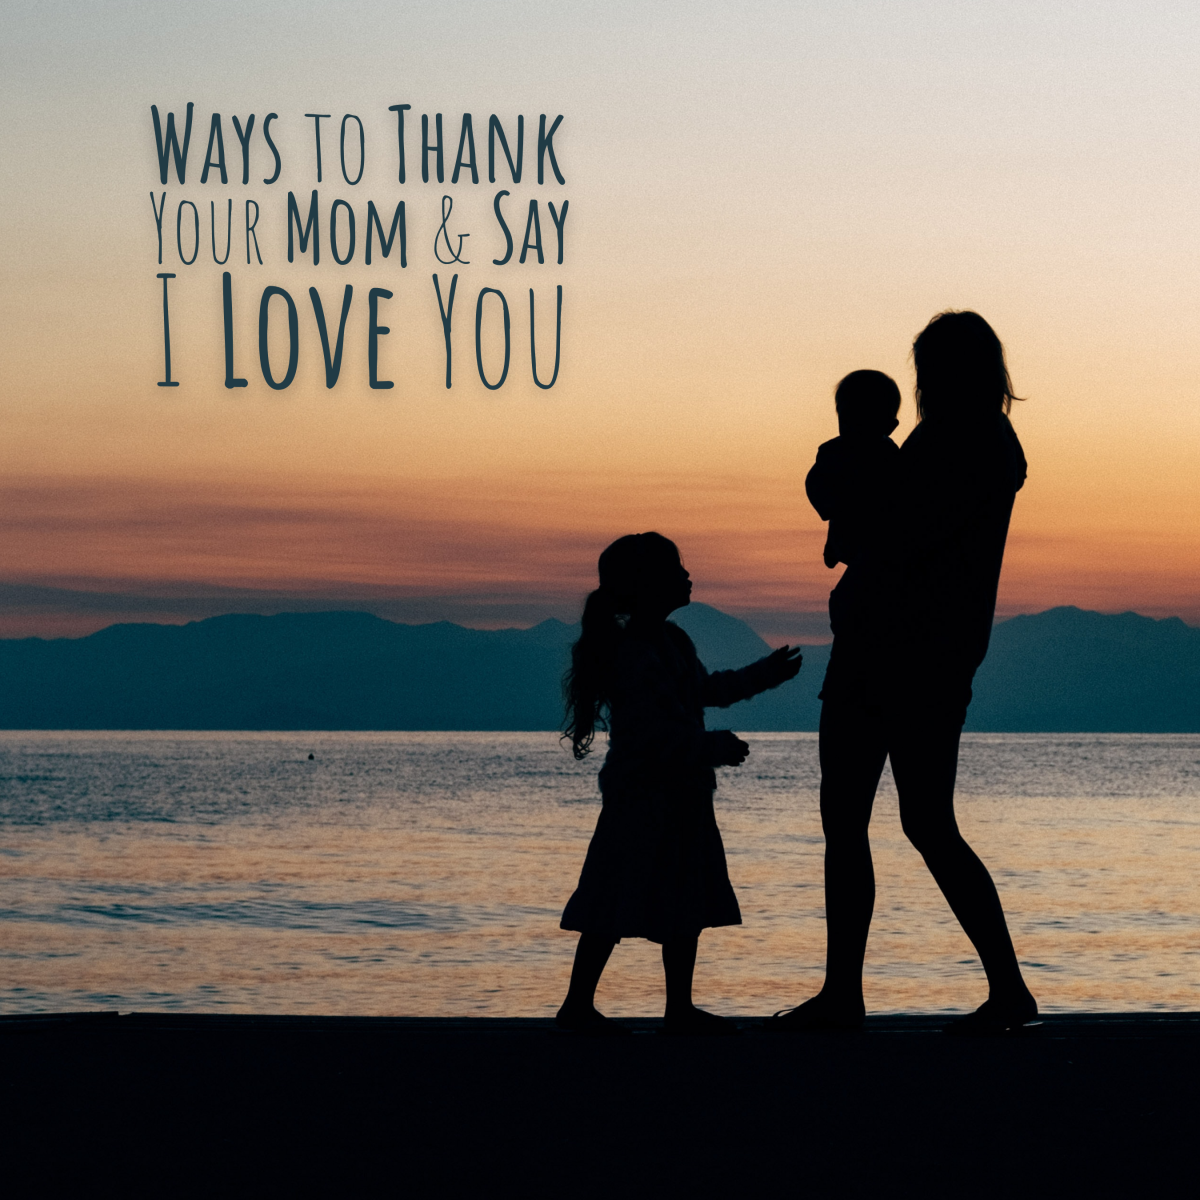 Want to thank your mother and let her know how much you love her? Read on to discover various ways to show your appreciation.